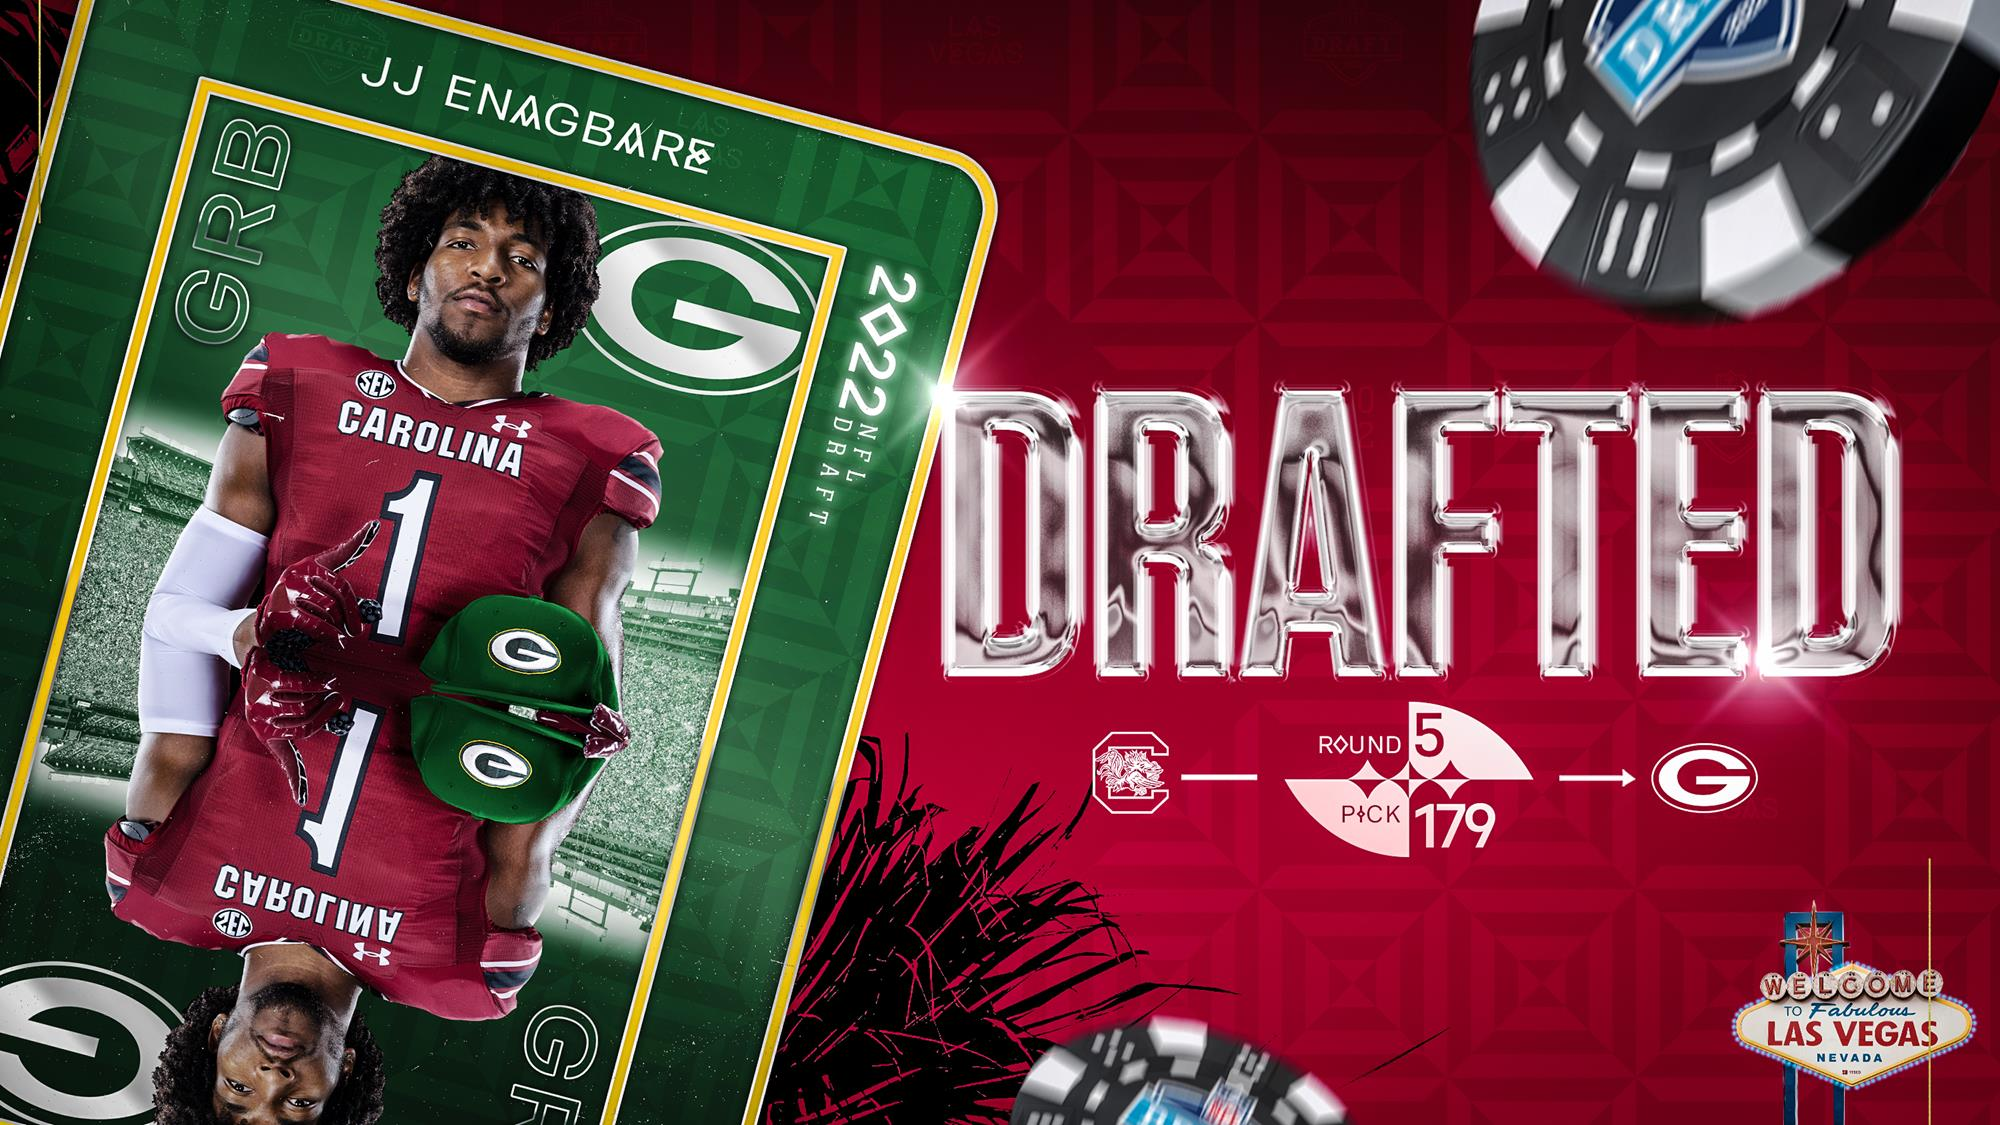 Enagbare Selected by Green Bay in the Fifth Round of the 2022 NFL Draft